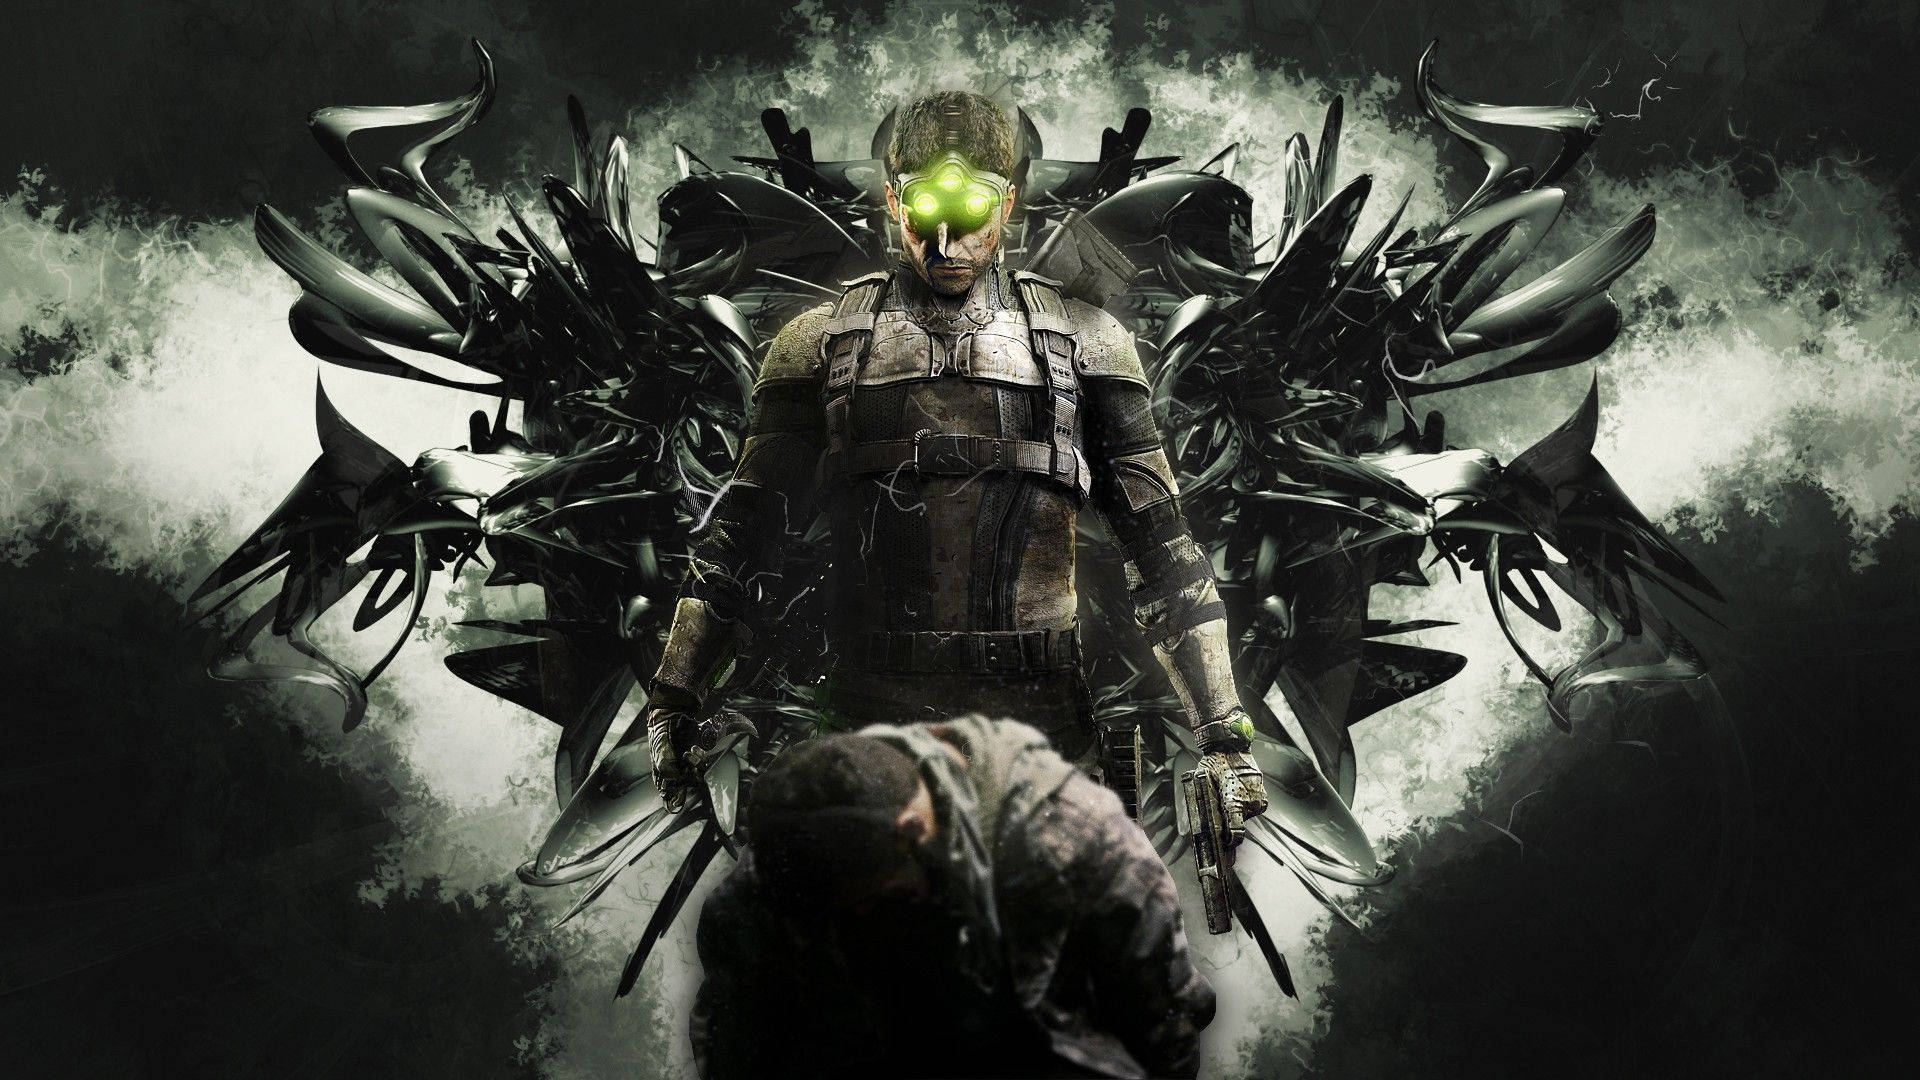 Cool Gaming Splinter Cell Background